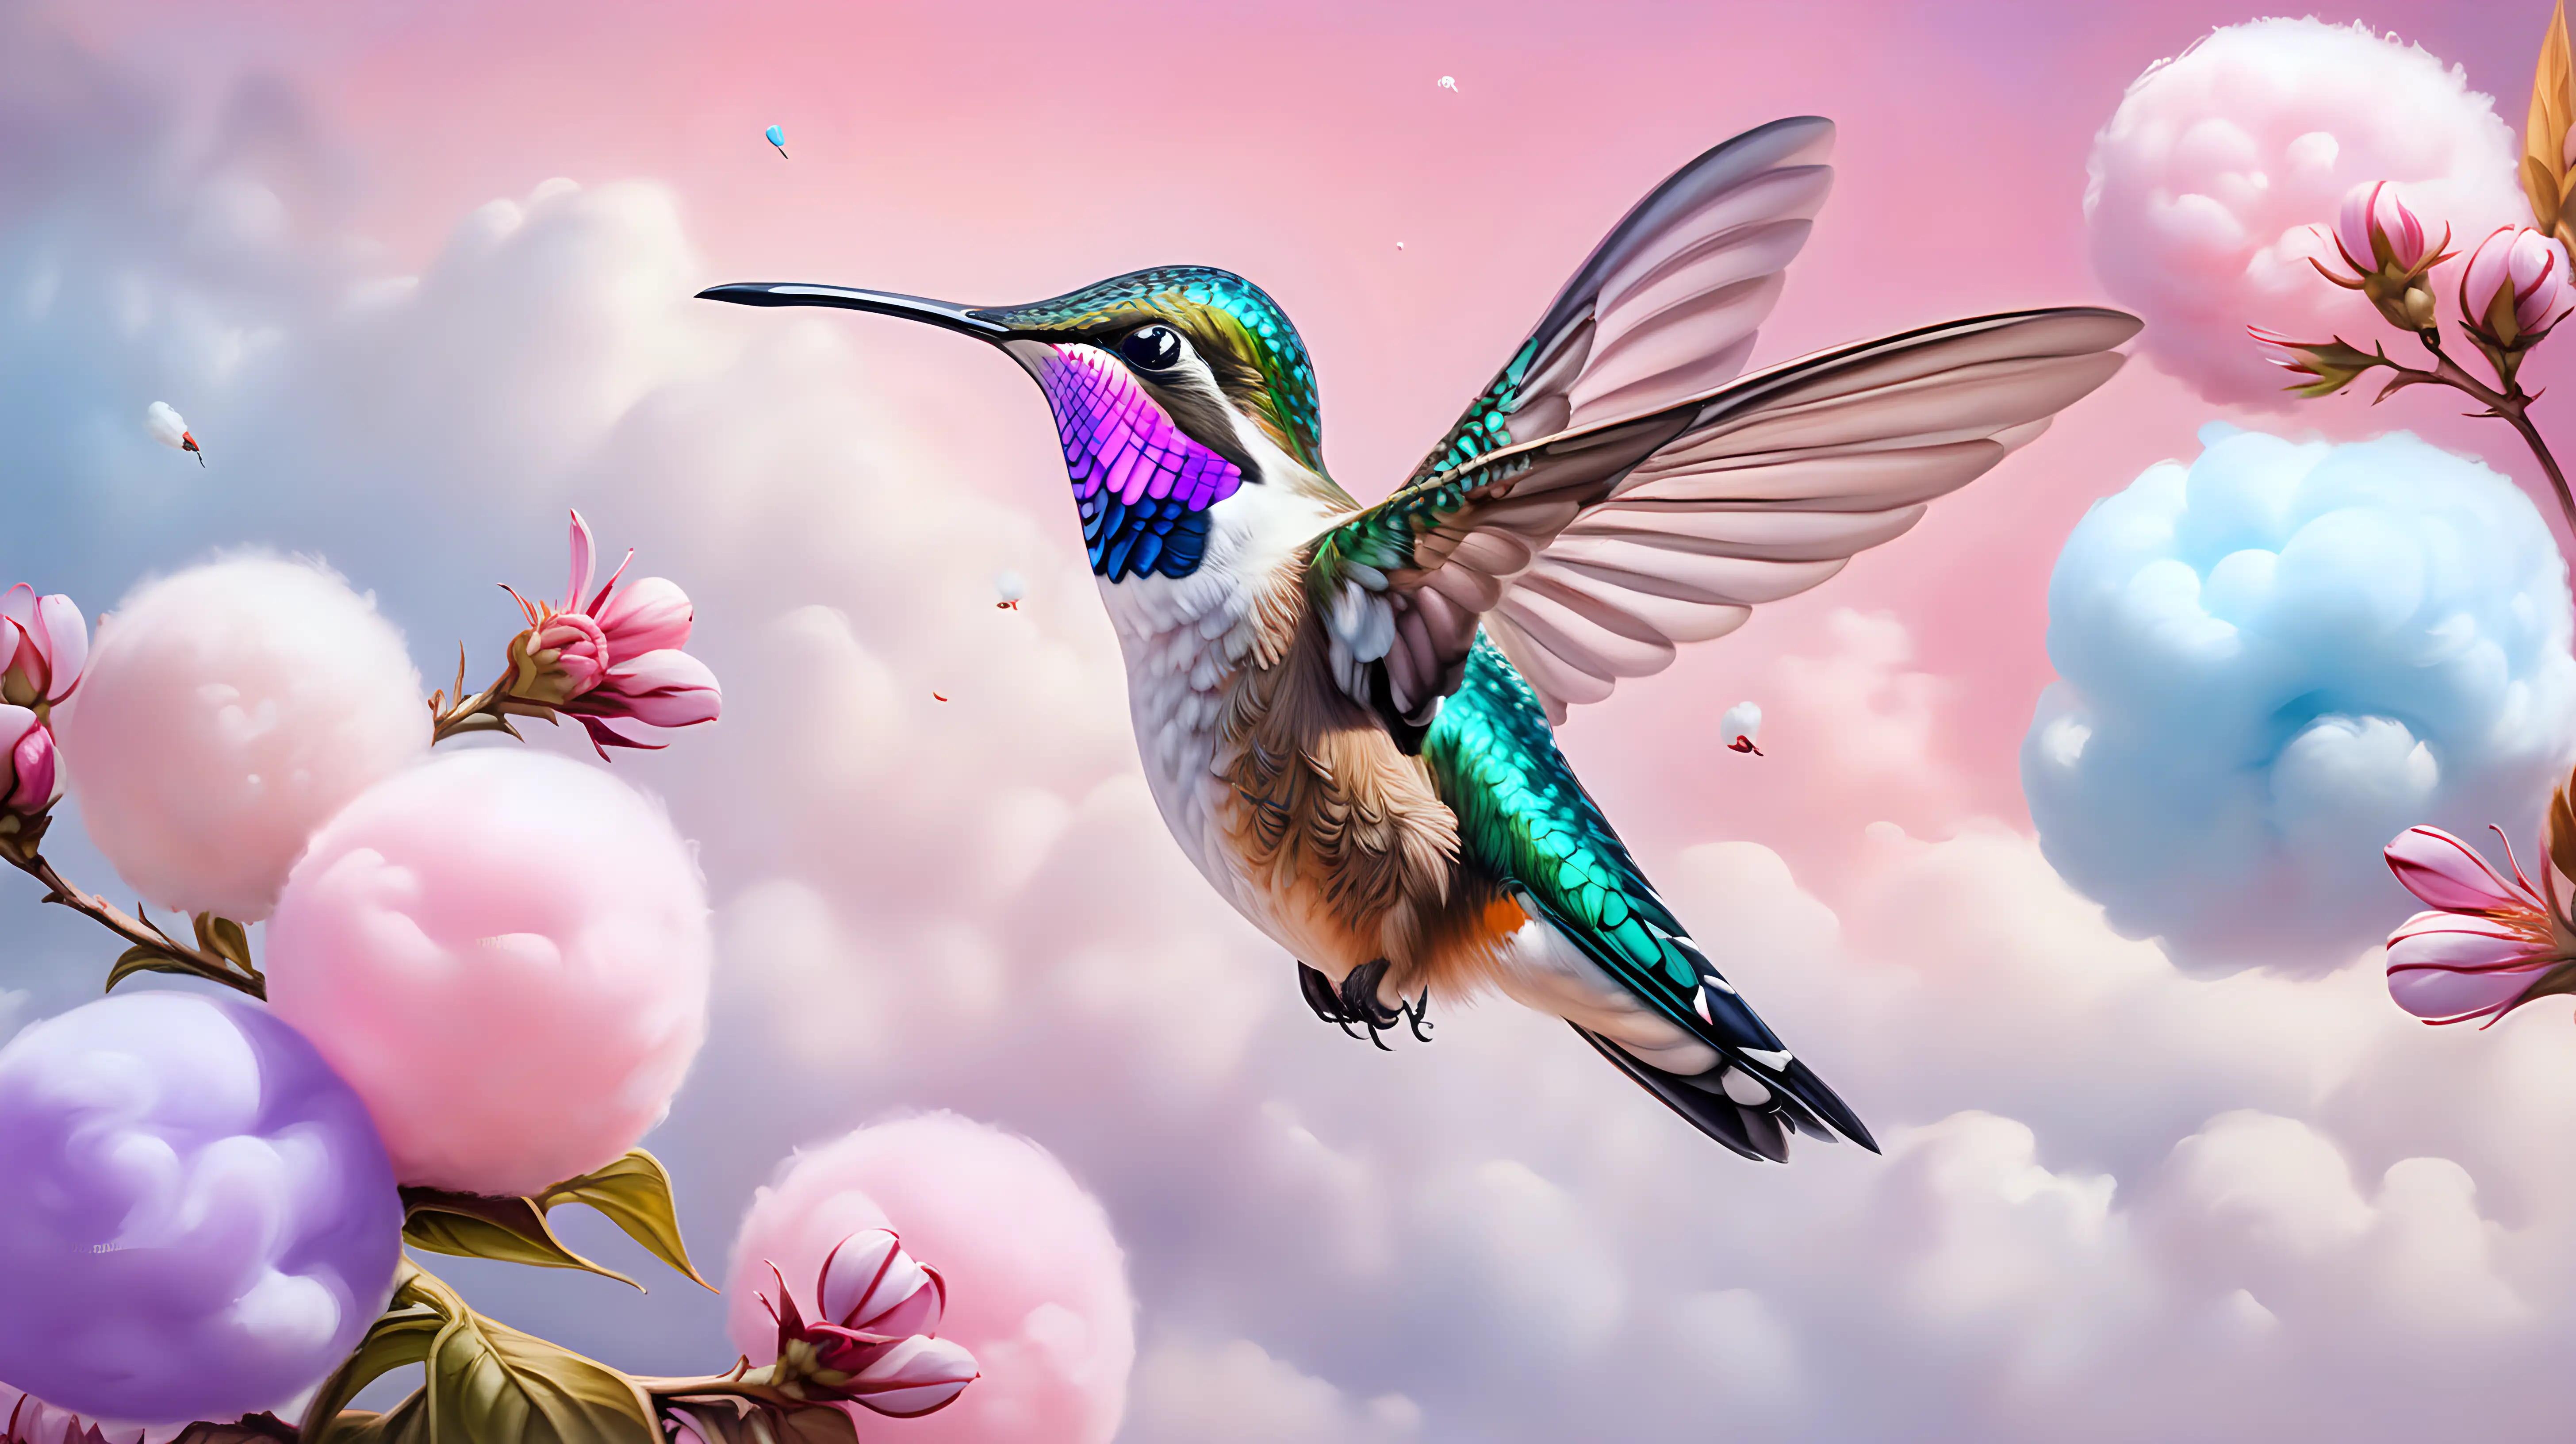 oil painting of a cute humming bird. Surrounded by pastel pink and purple cotton candy flowers and white cotton candy clouds. #F8C8DC